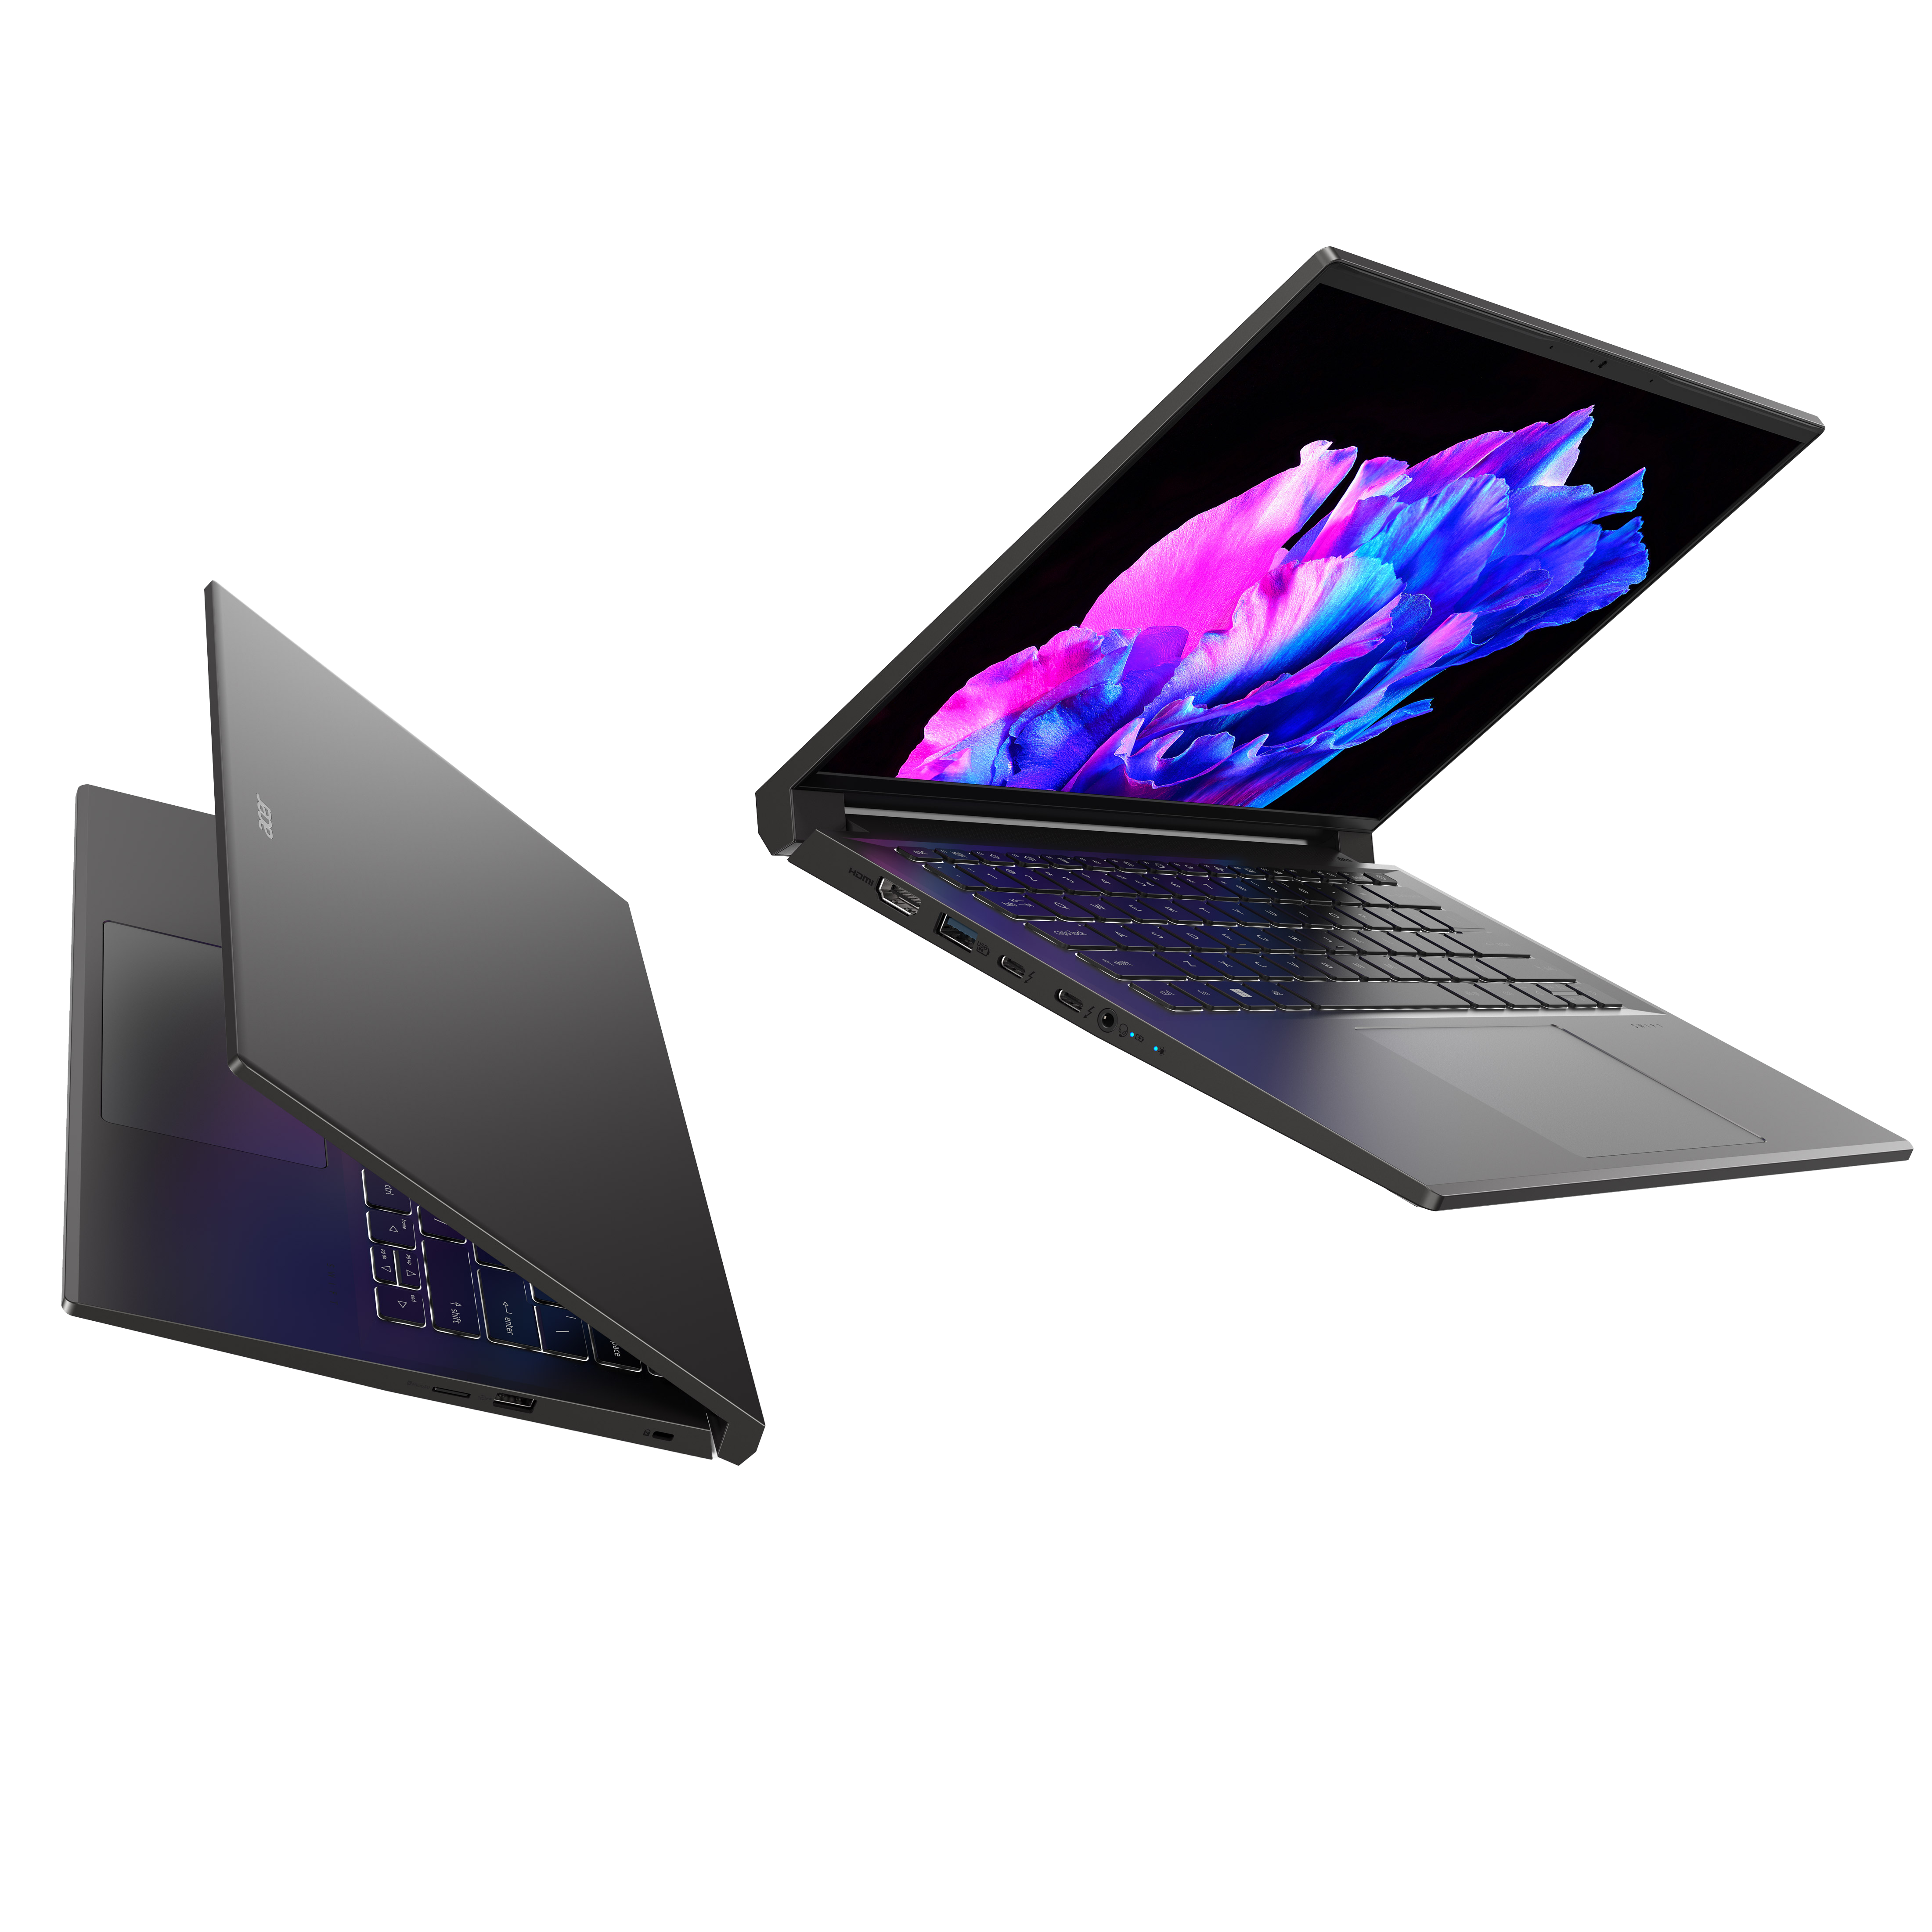 TWo Acer Swift X 14 laptops, one with the lid open at roughly 30 degrees and seen from the right, and the other with the lid open at about 70 degrees and seen at an angle from the left